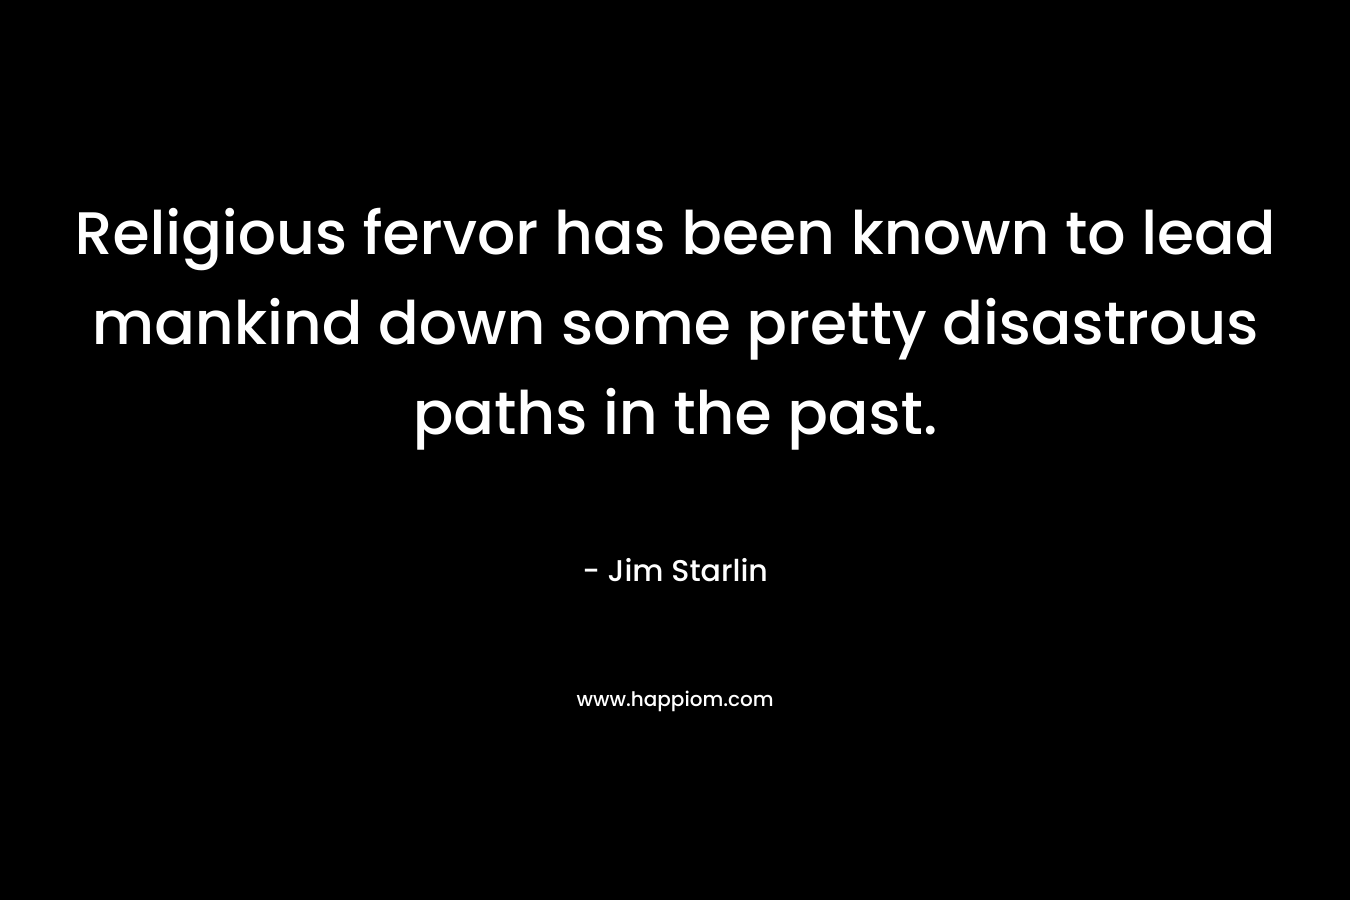 Religious fervor has been known to lead mankind down some pretty disastrous paths in the past. – Jim Starlin